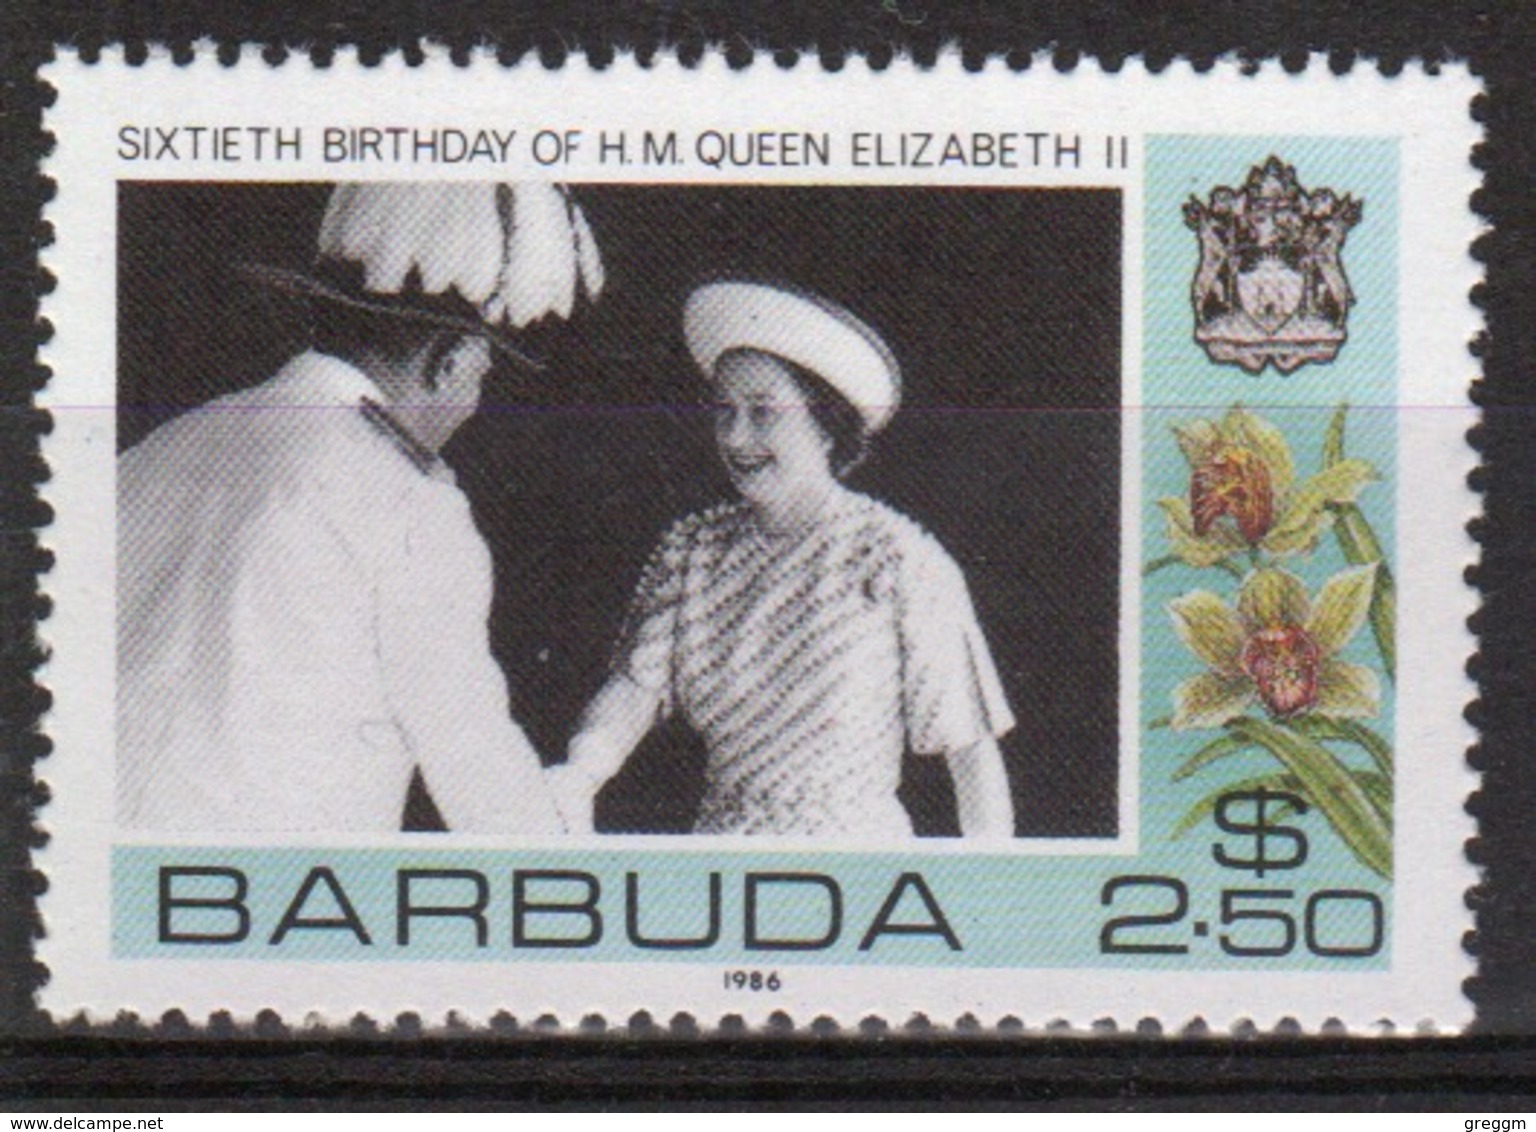 Barbuda 1986 Single $2.50 Stamp Celebrating The 60th Birthday Of The Queen. - Antigua And Barbuda (1981-...)